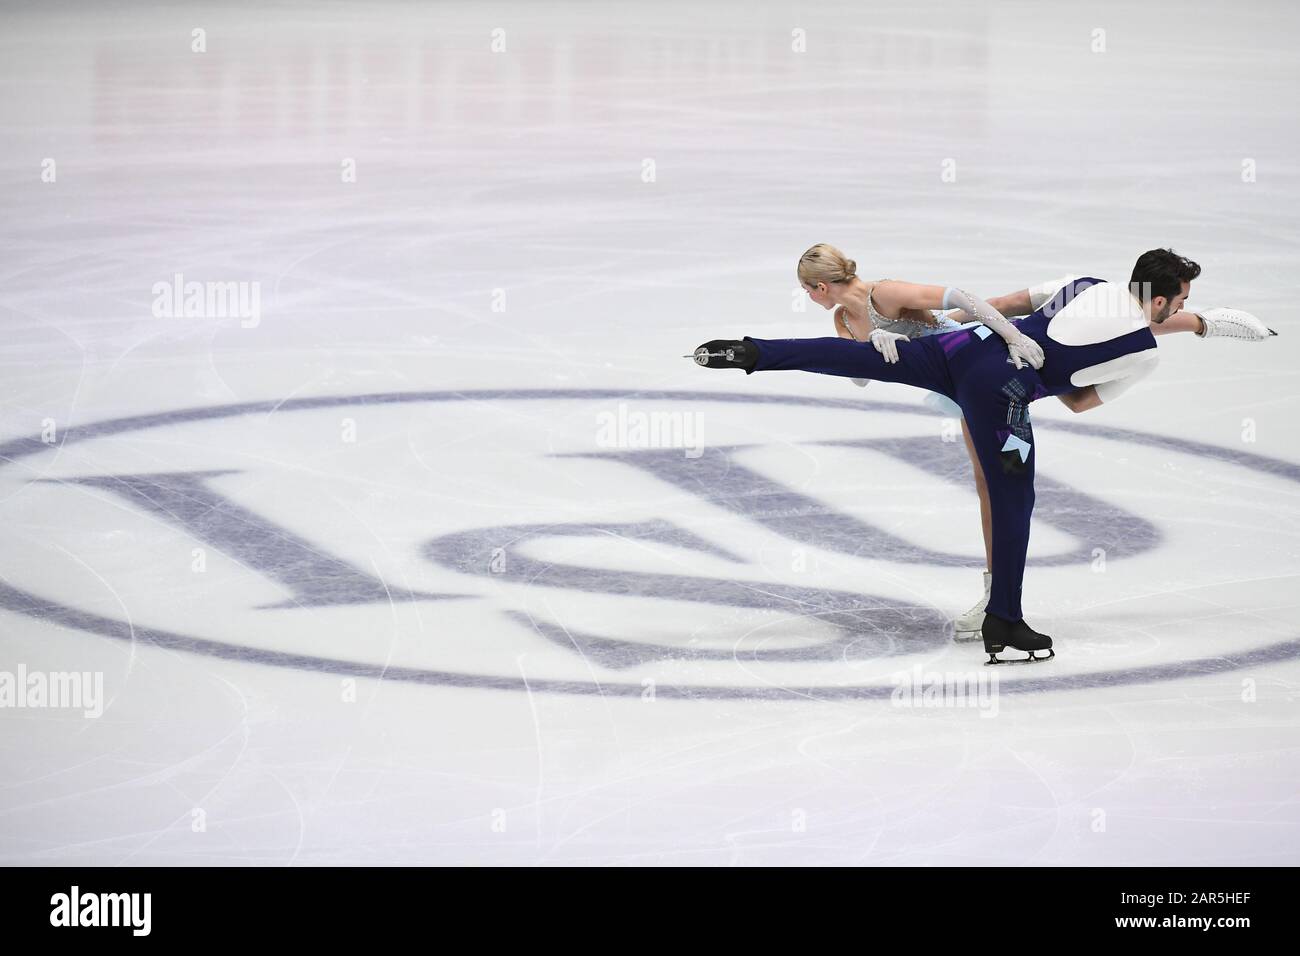 Olivia SMART & Adrian DIAZ from Spain, during Dance Free, in Ice Dance at the ISU European Figure Skating Championships 2020 at Steiermarkhalle, on January 25, 2020 in Graz, Austria. Credit: Raniero Corbelletti/AFLO/Alamy Live News Stock Photo